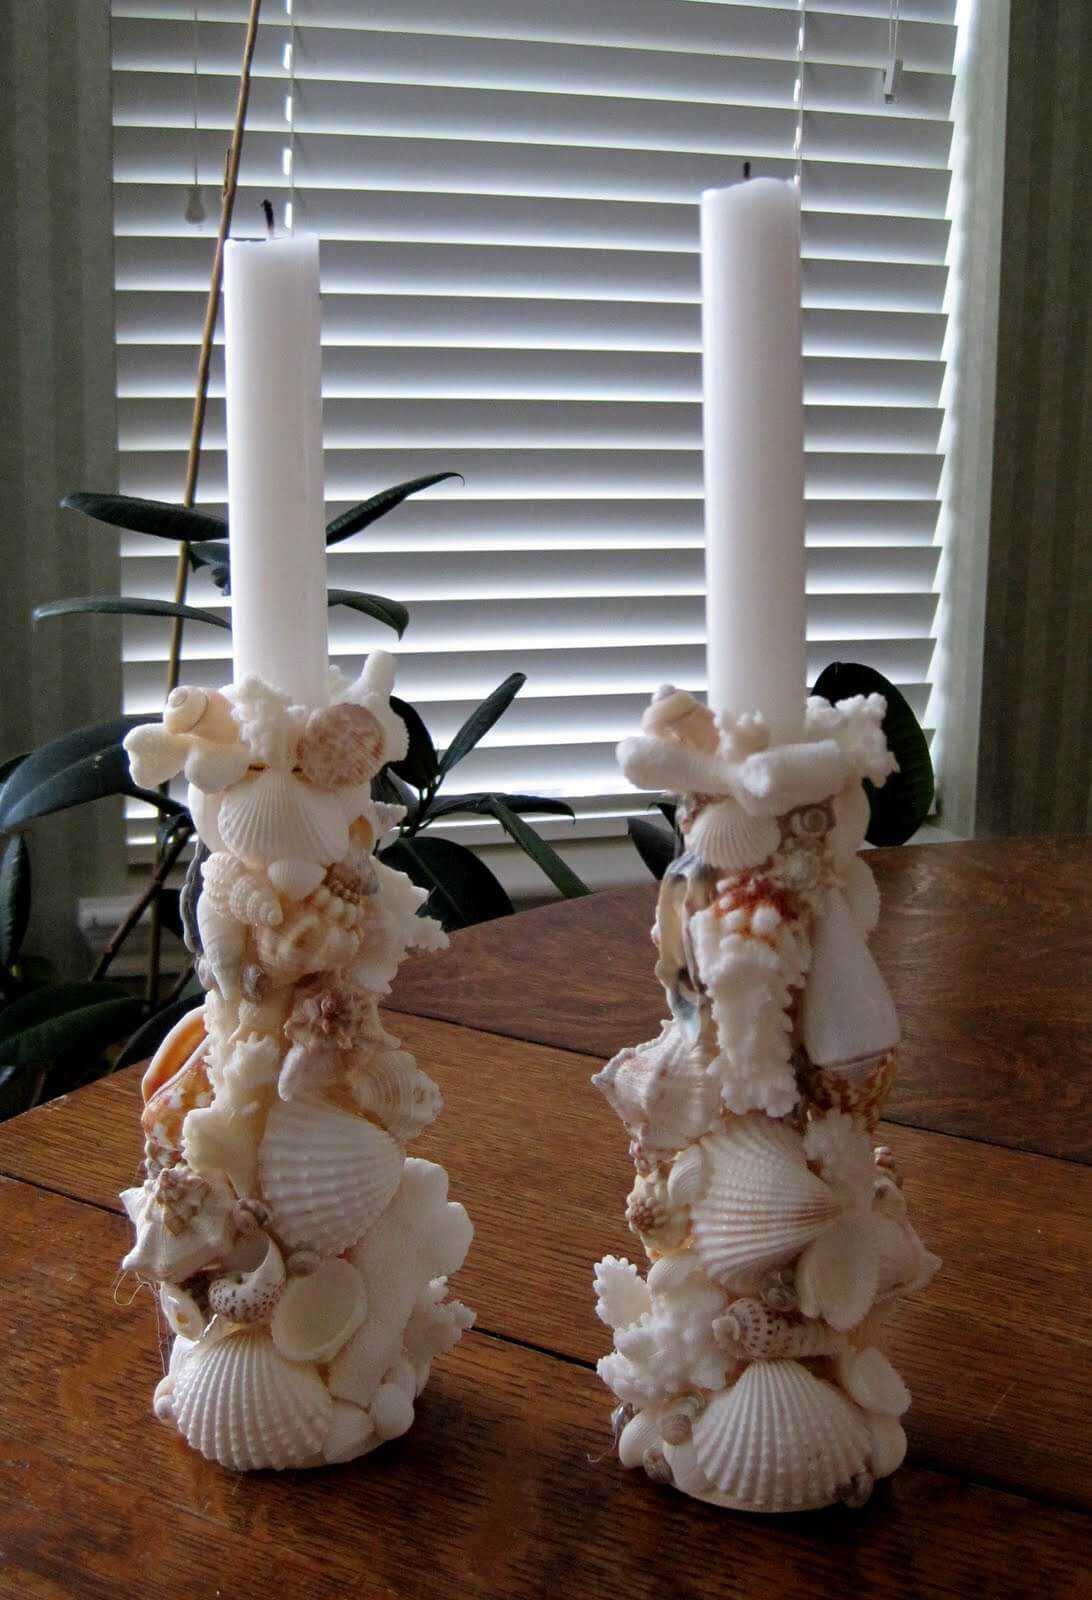 A Candelabra of Small Shells